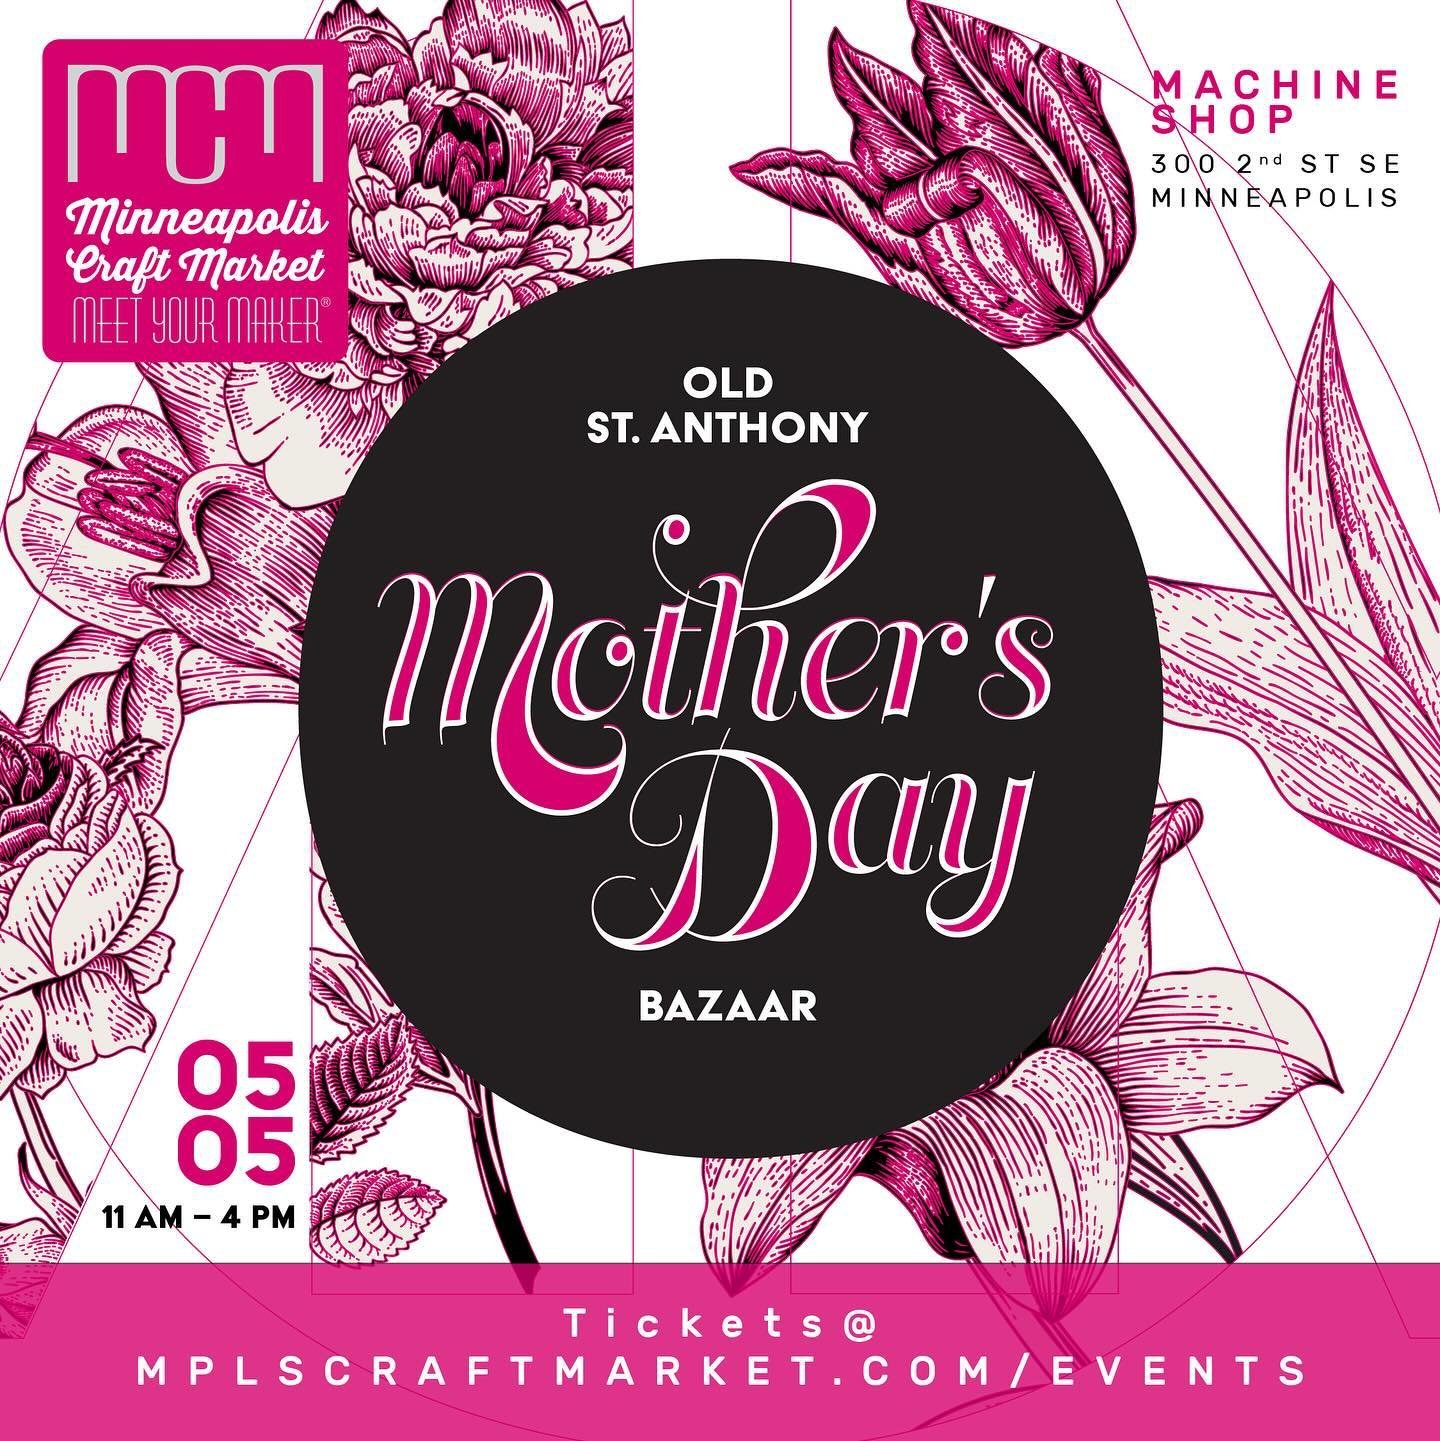 Spoil Mom THIS Sunday at the Old St. Anthony 💐Mother&rsquo;s Day Market @machineshopmpls! 

Our makers have endless handmade treasures made with love perfect for Mother&rsquo;s Day gifts 💝. @djbusterbaxter will be in the building keeping the good v